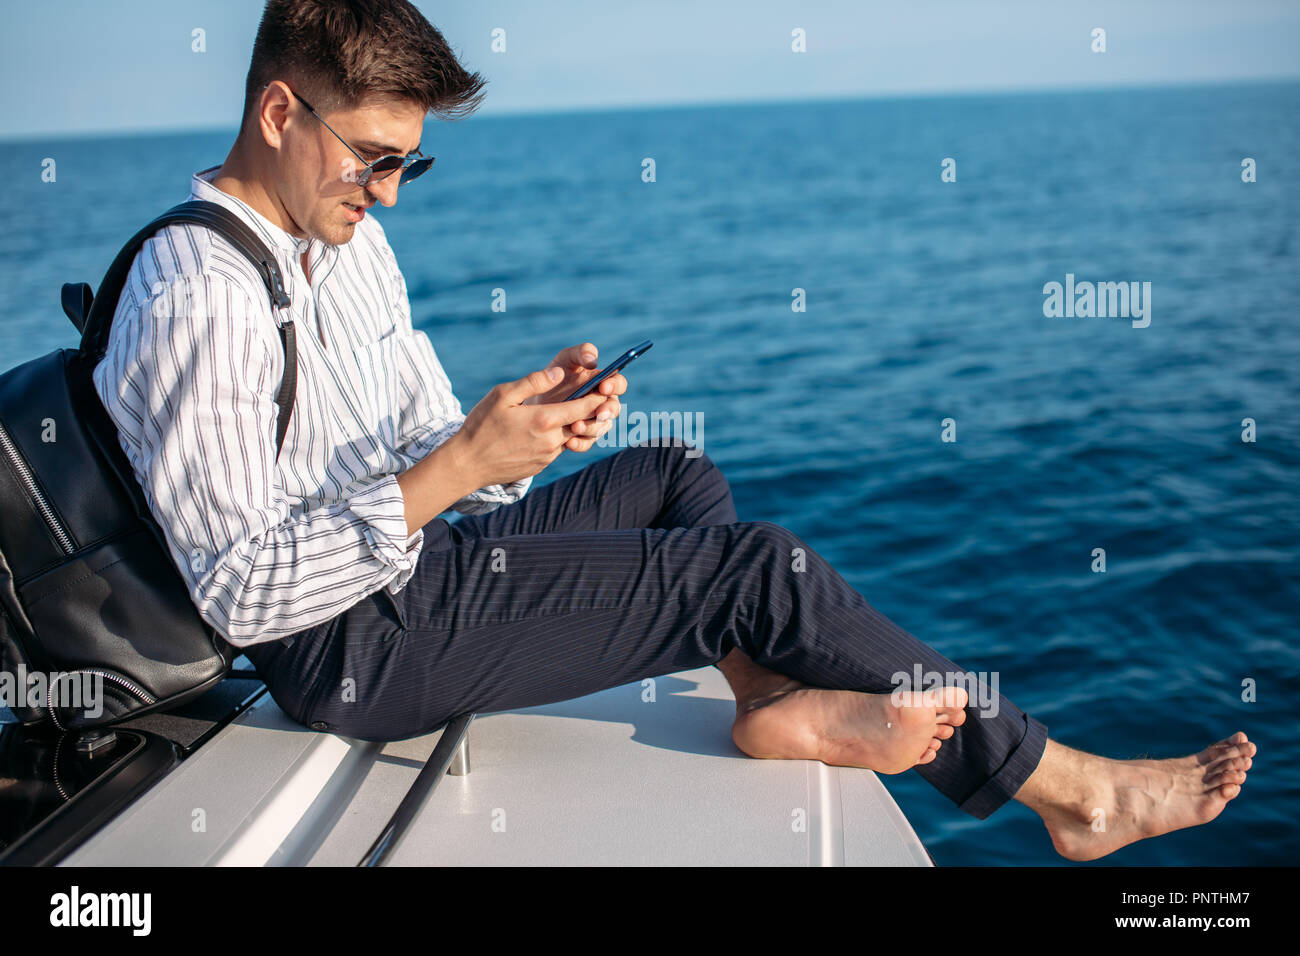 Handsome male model posing in front of a luxury yacht during summer  vacation Stock Photo - Alamy